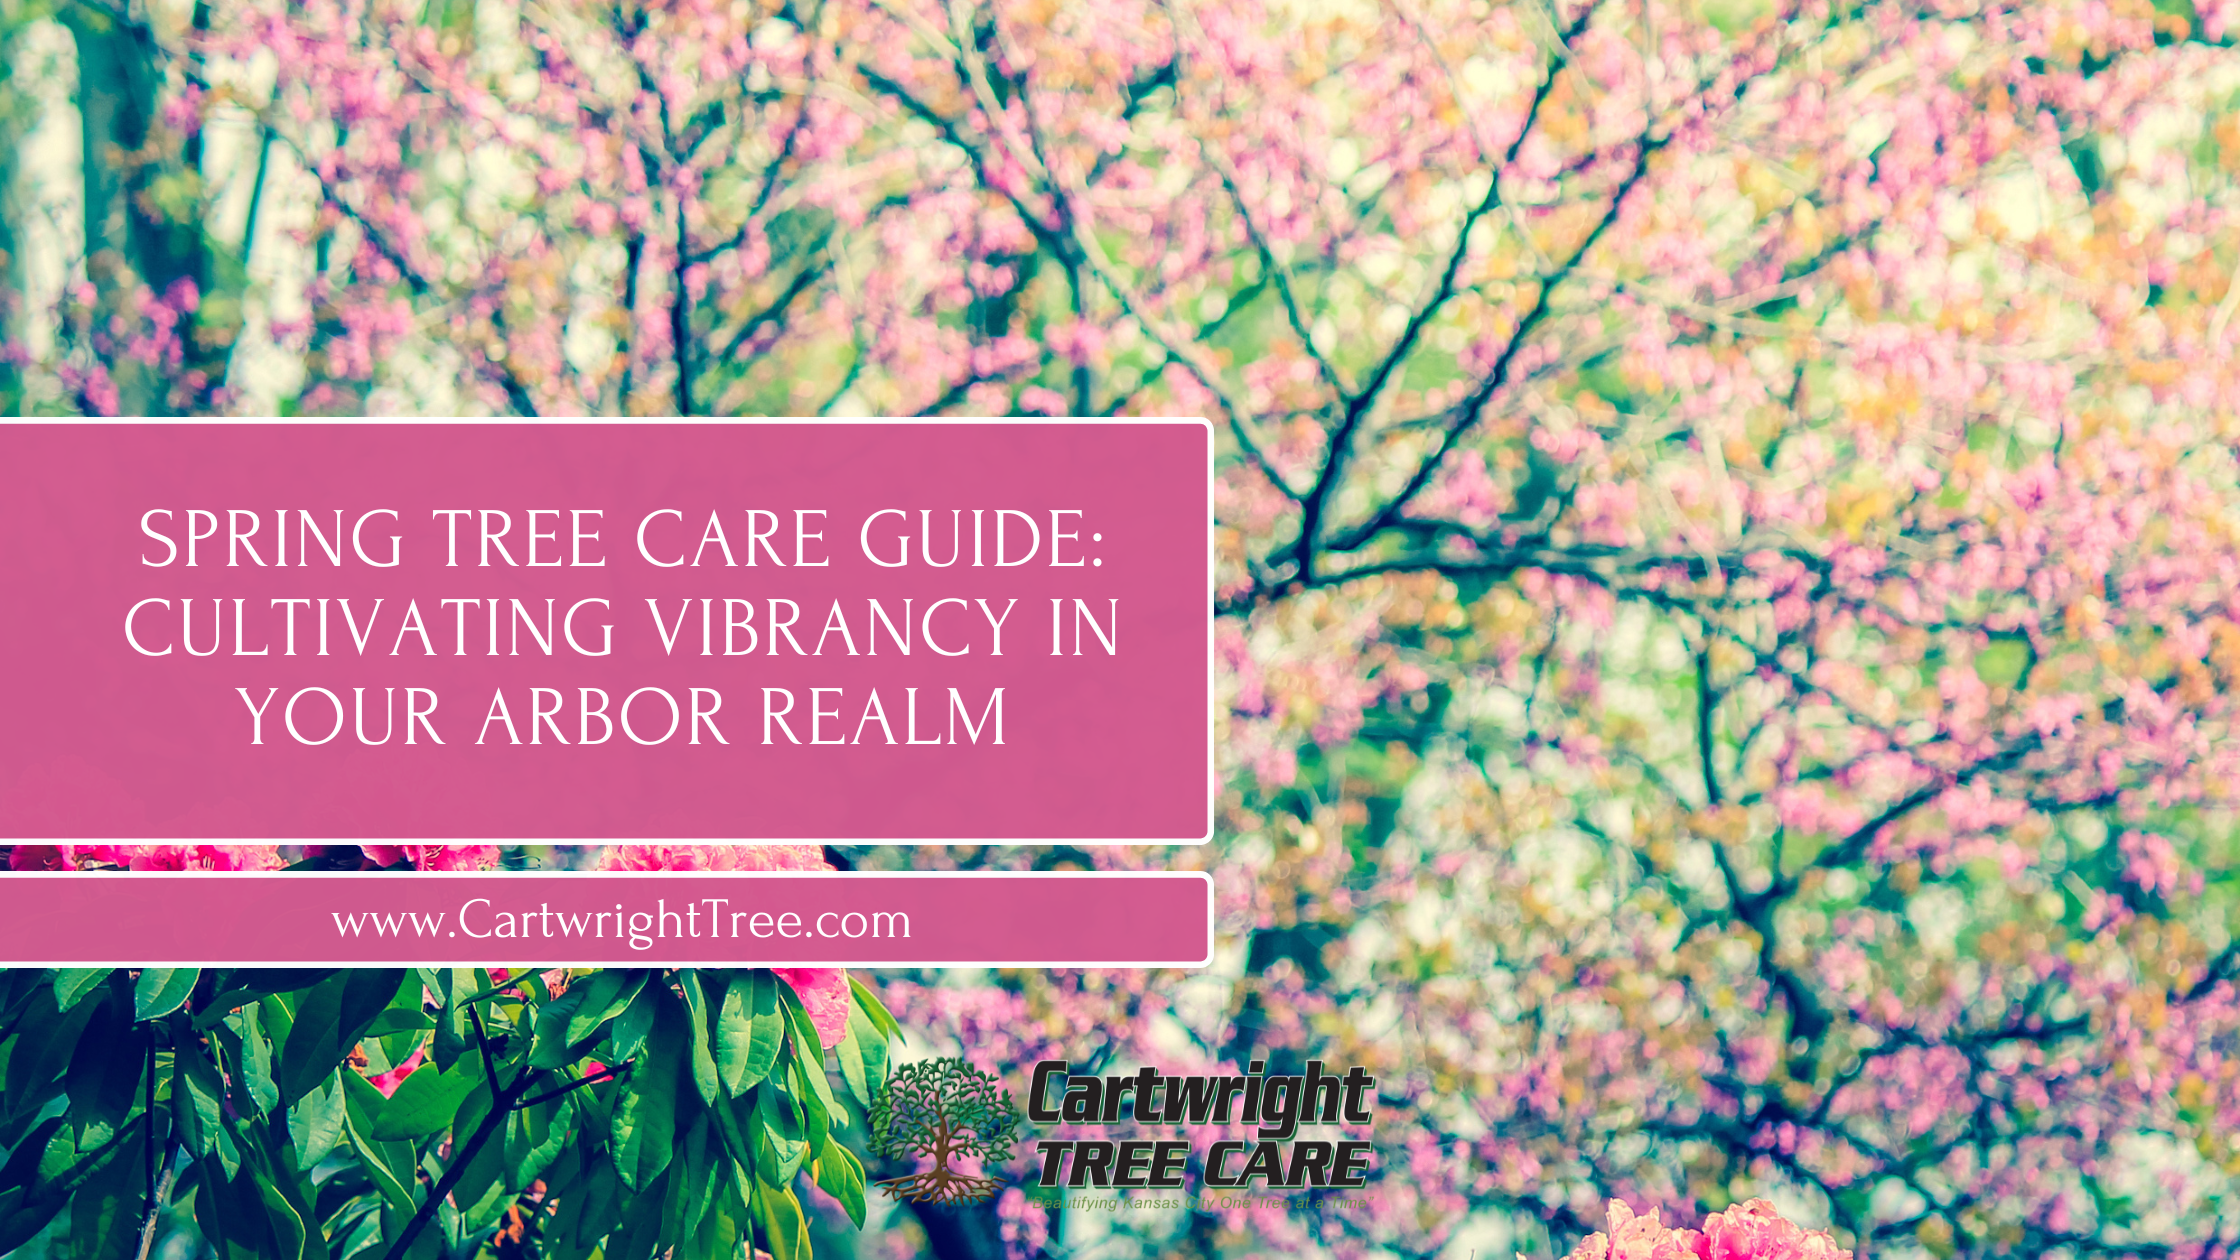 Blog Cover - Spring Tree Care Guide Cultivating Vibrancy in Your Arbor Realm